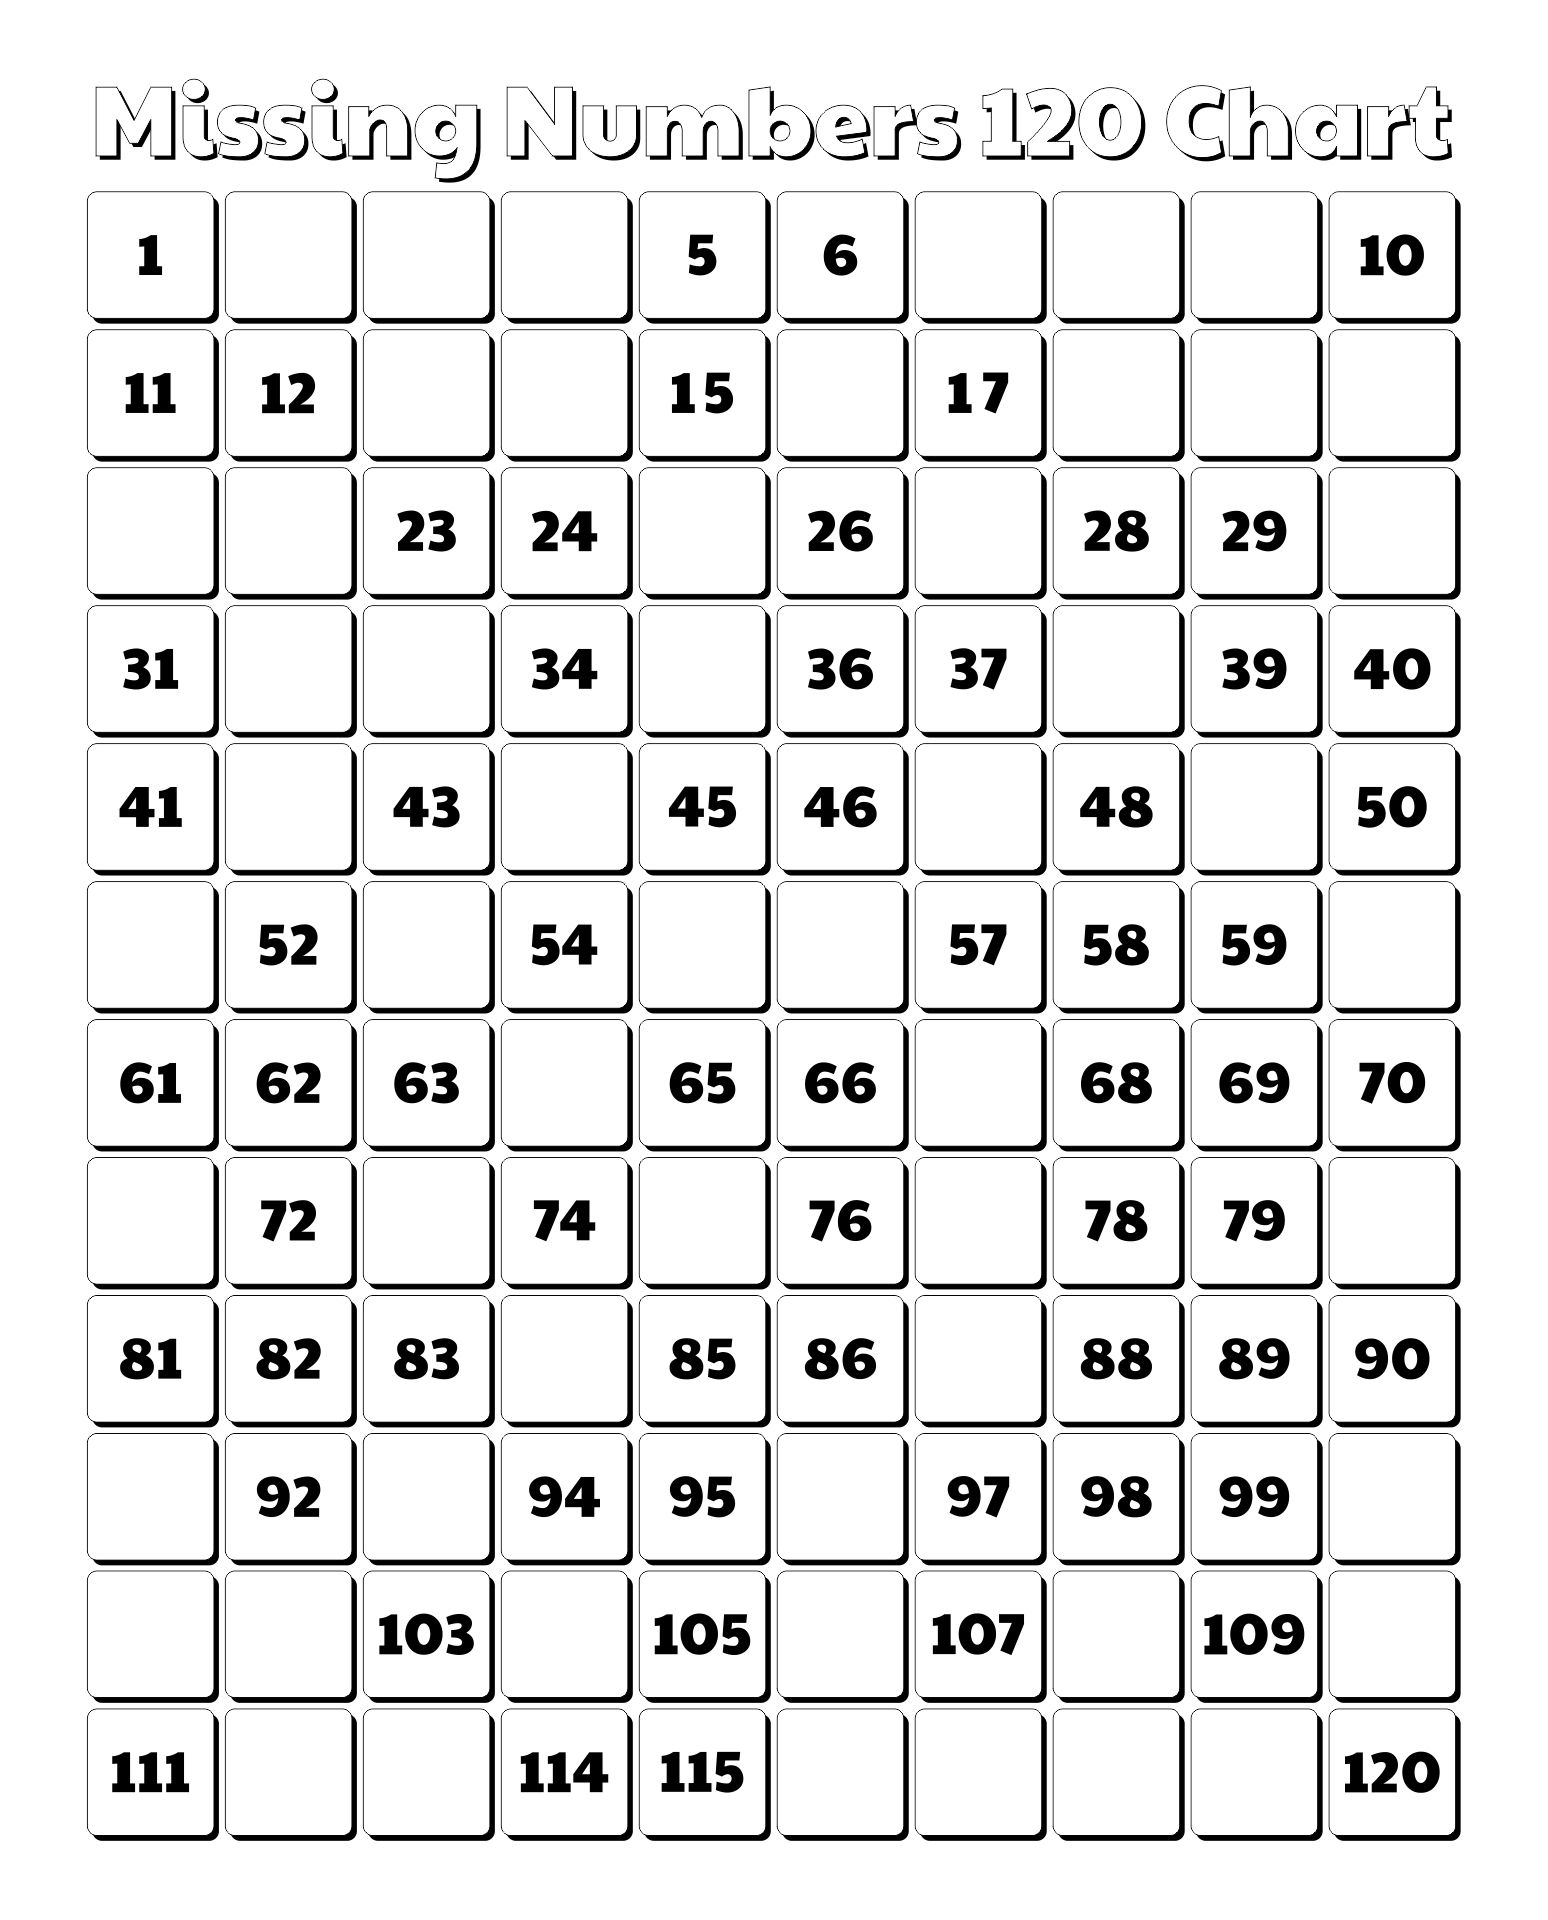 Printable Missing Numbers 120 Chart